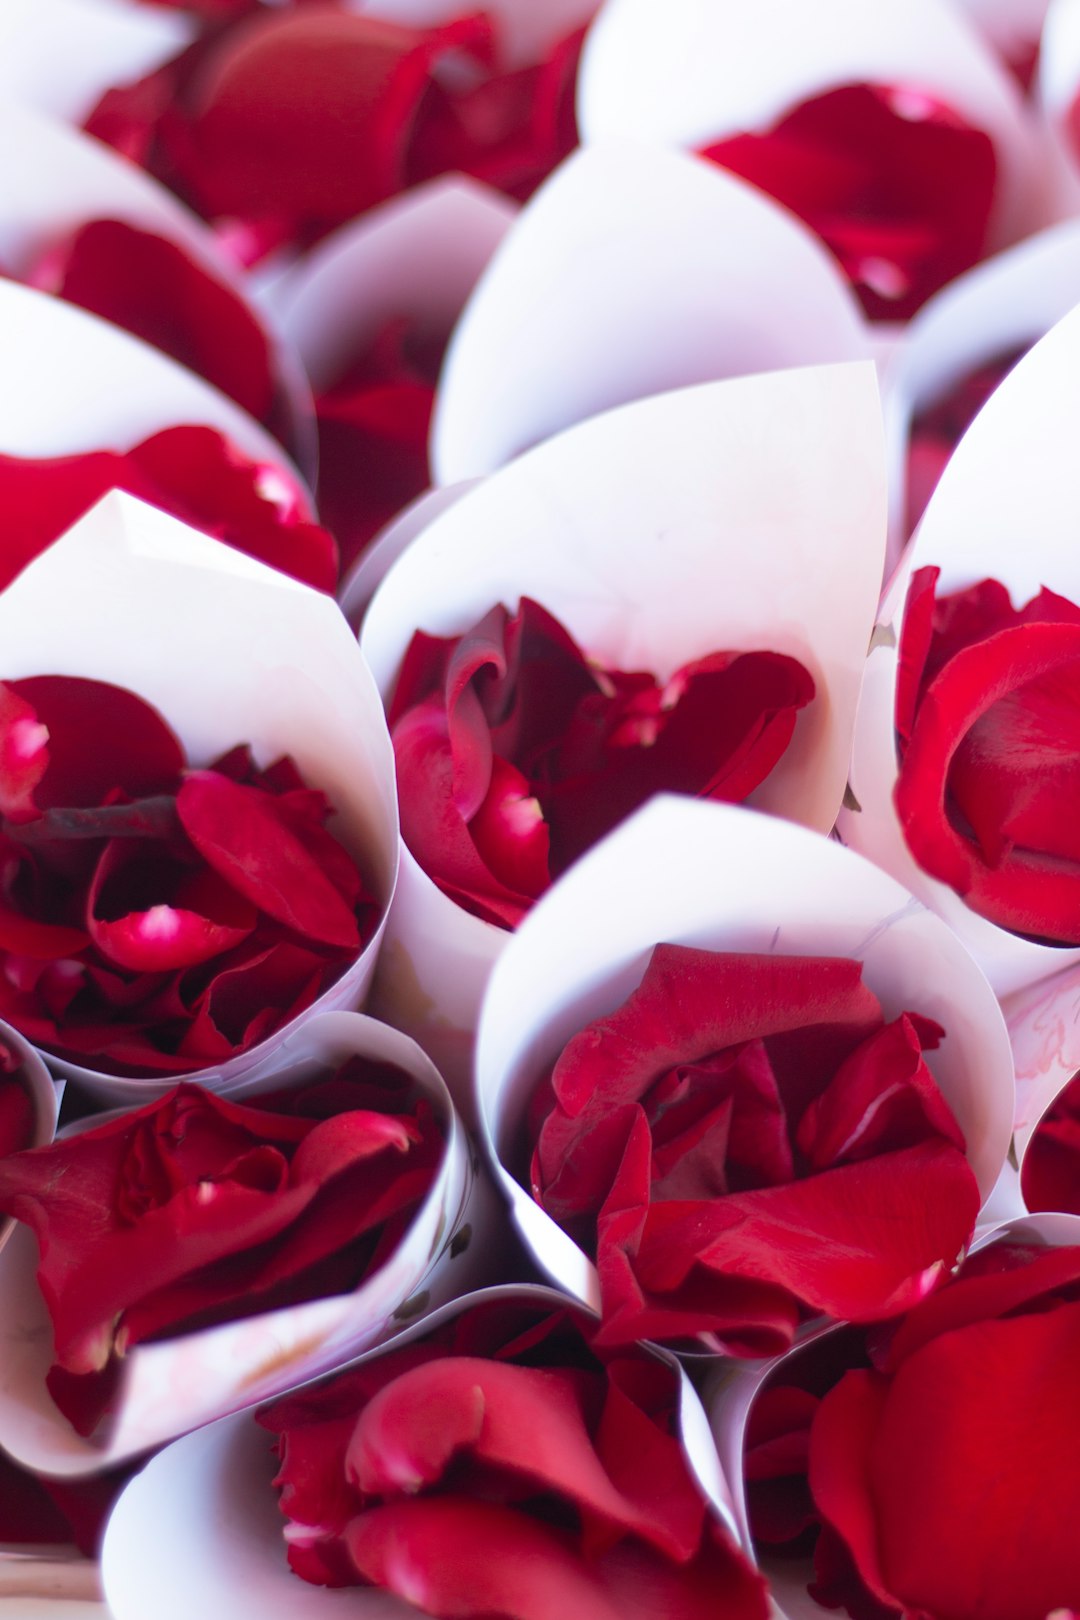 500+ Red And White Rose Pictures [HQ] | Download Free Images on Unsplash